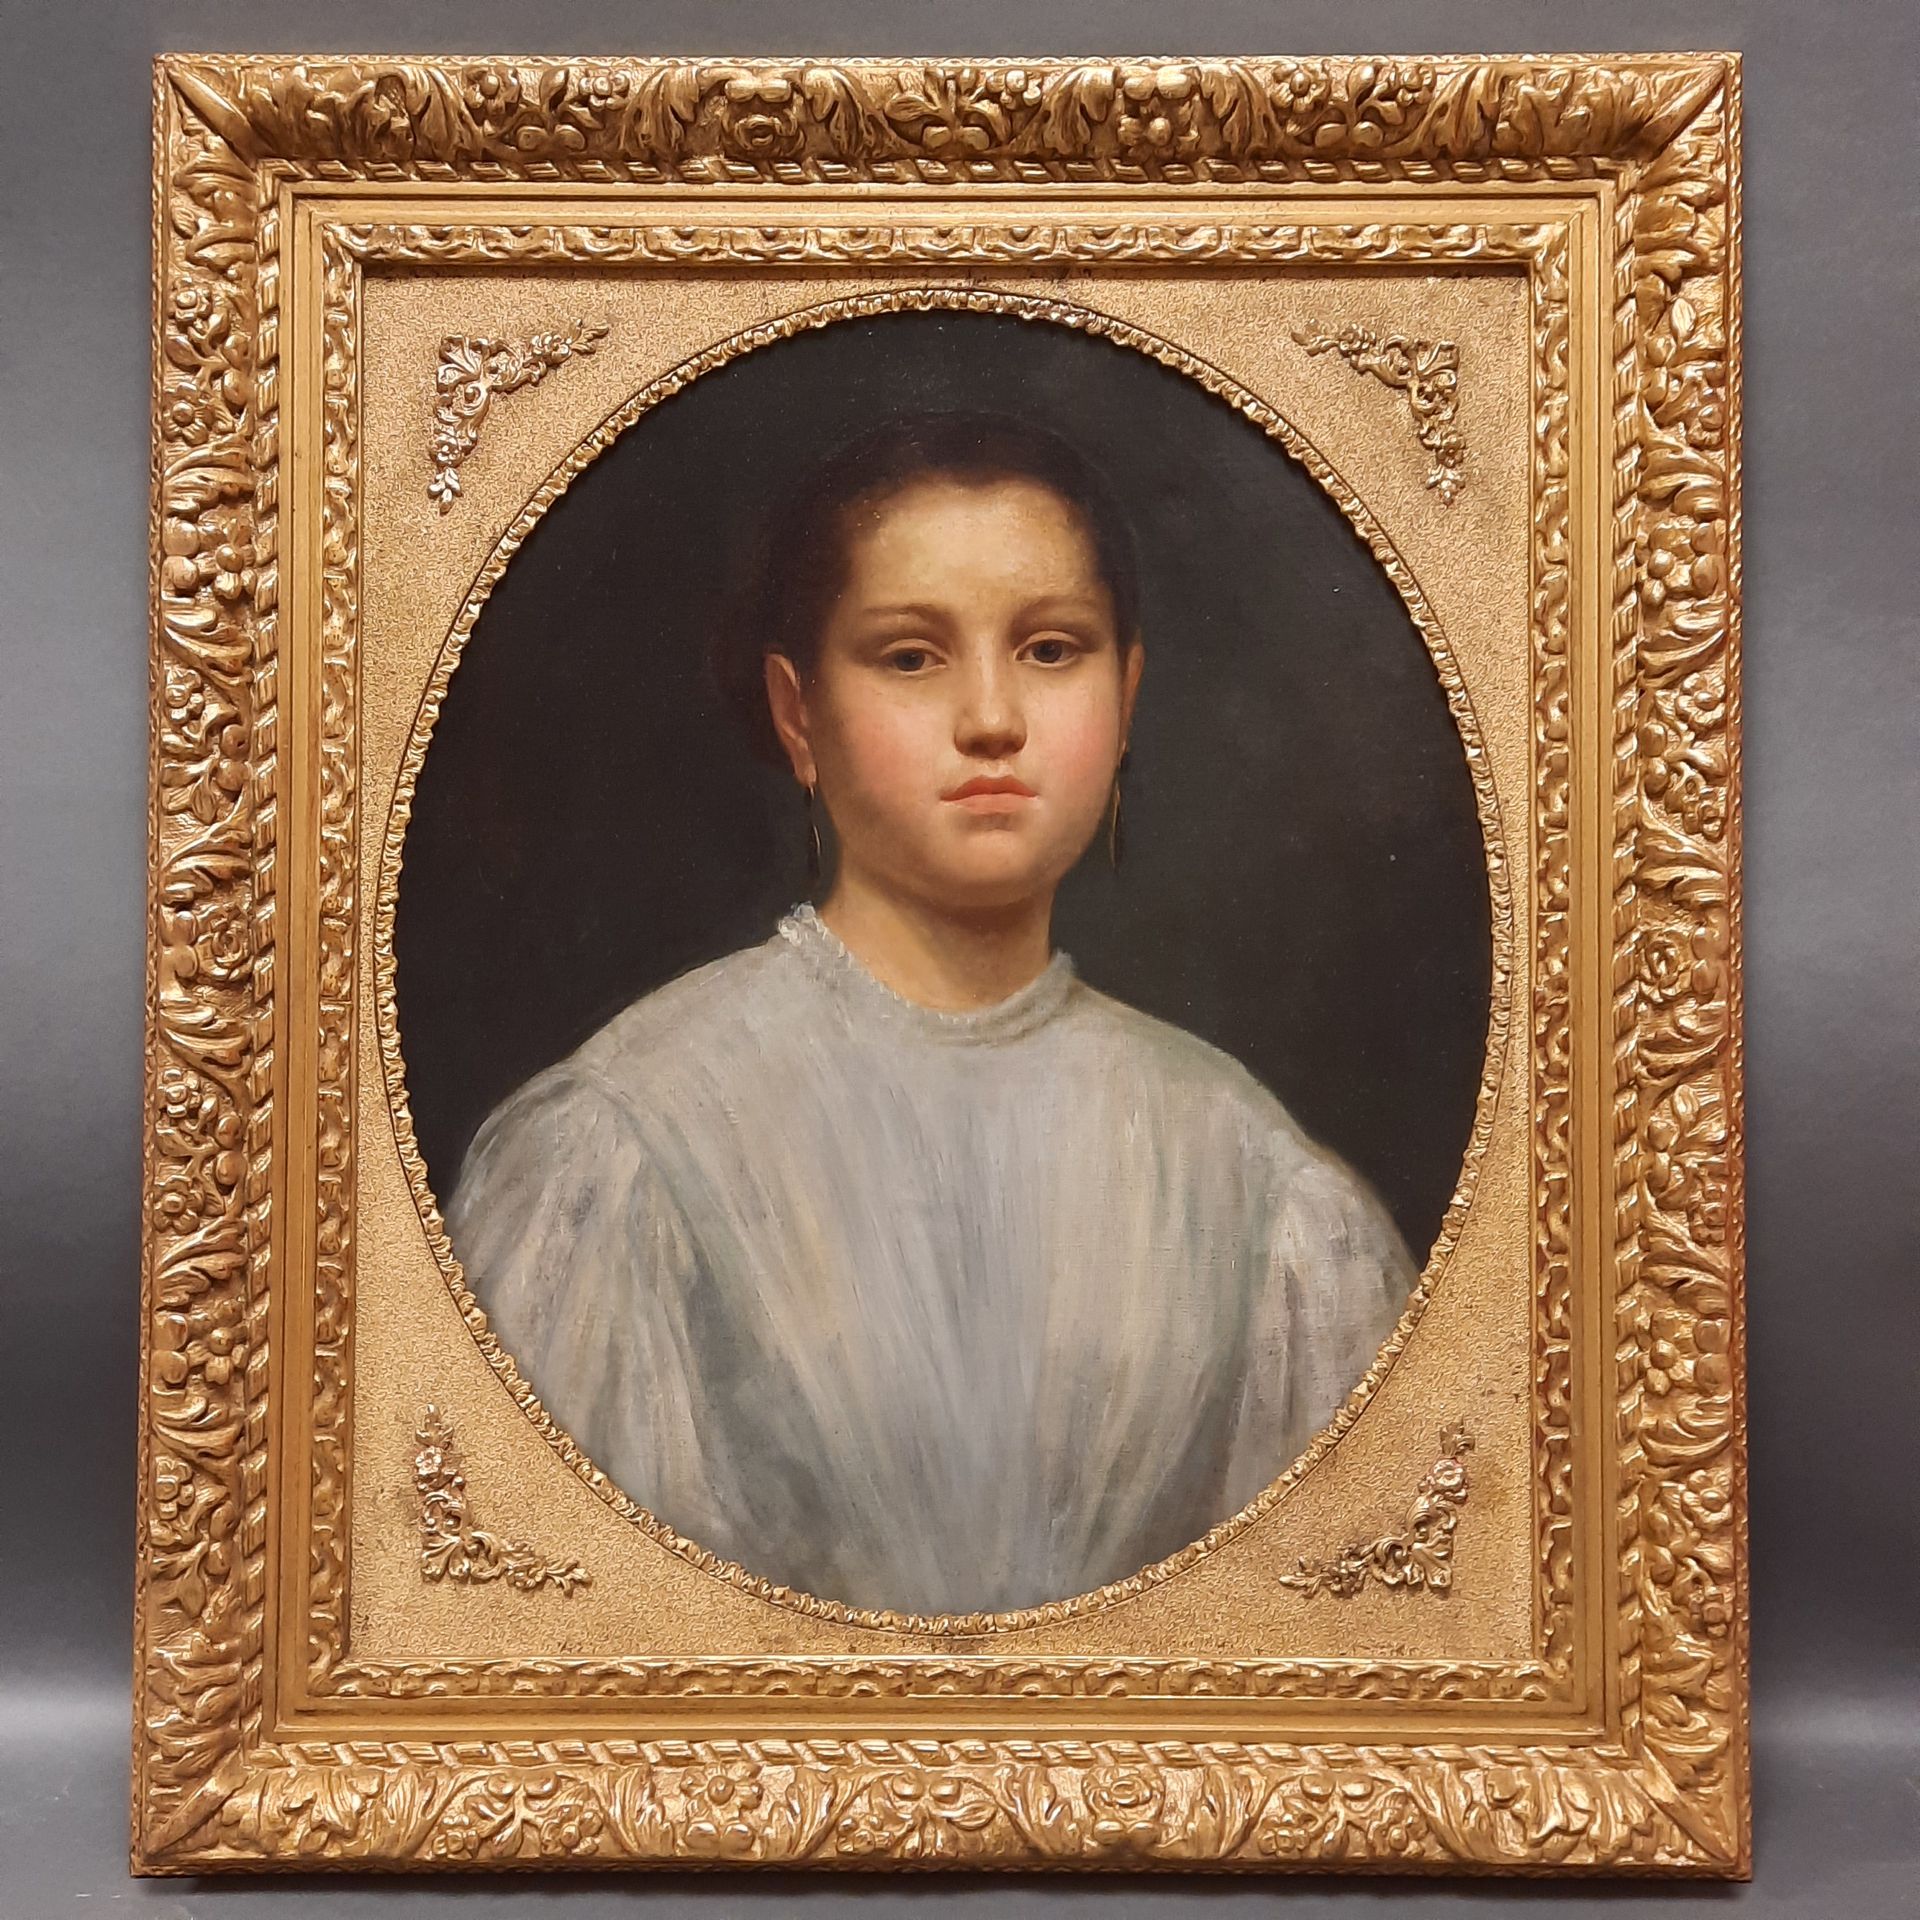 Null French school of the 19th century

Presumed portrait of Camille Claudel

Oi&hellip;